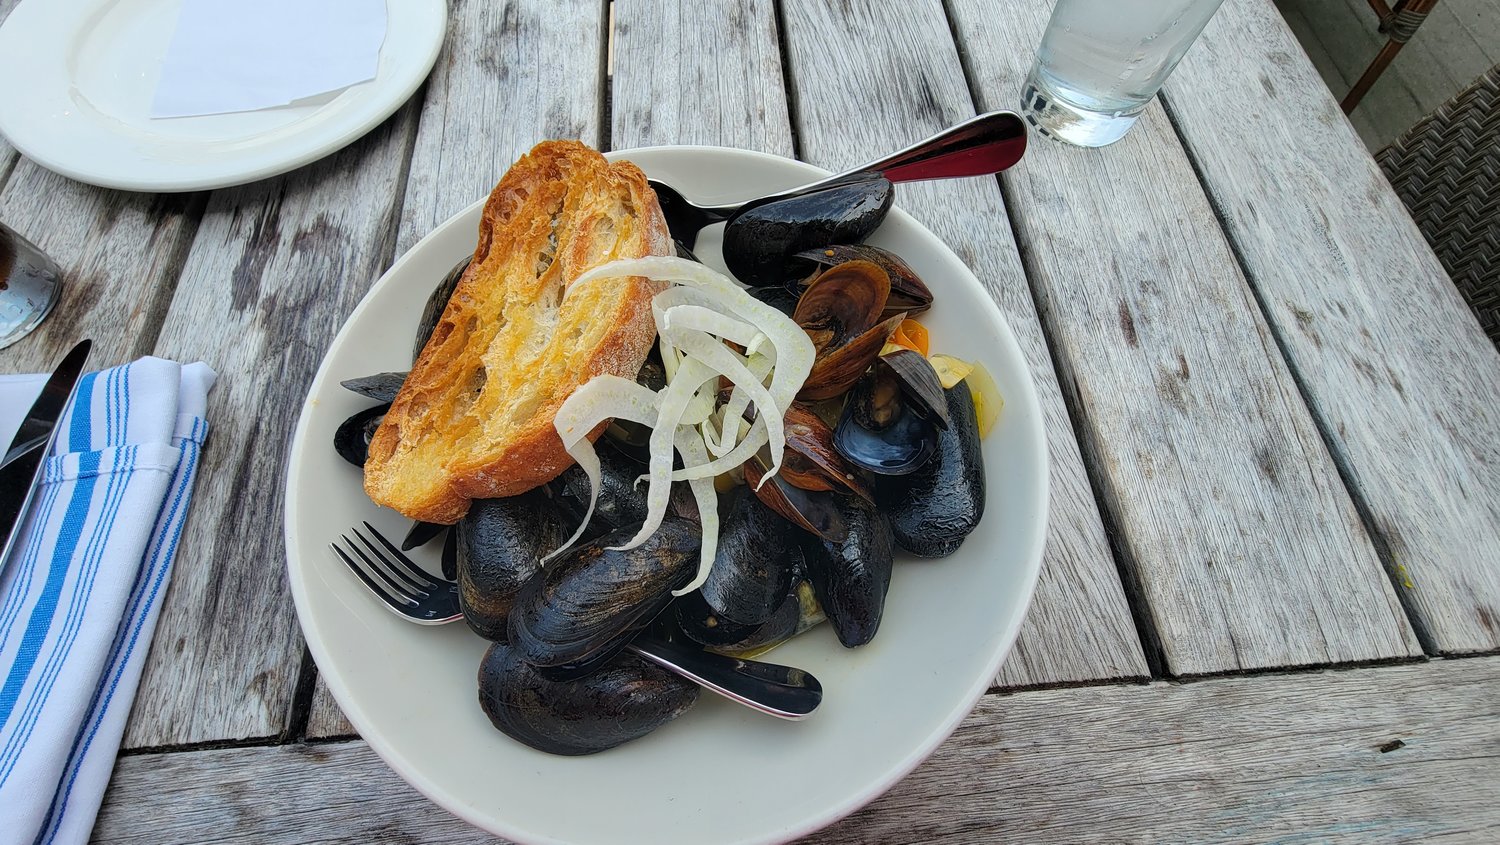 The Easton Street mussels are served in a light white-wine broth.